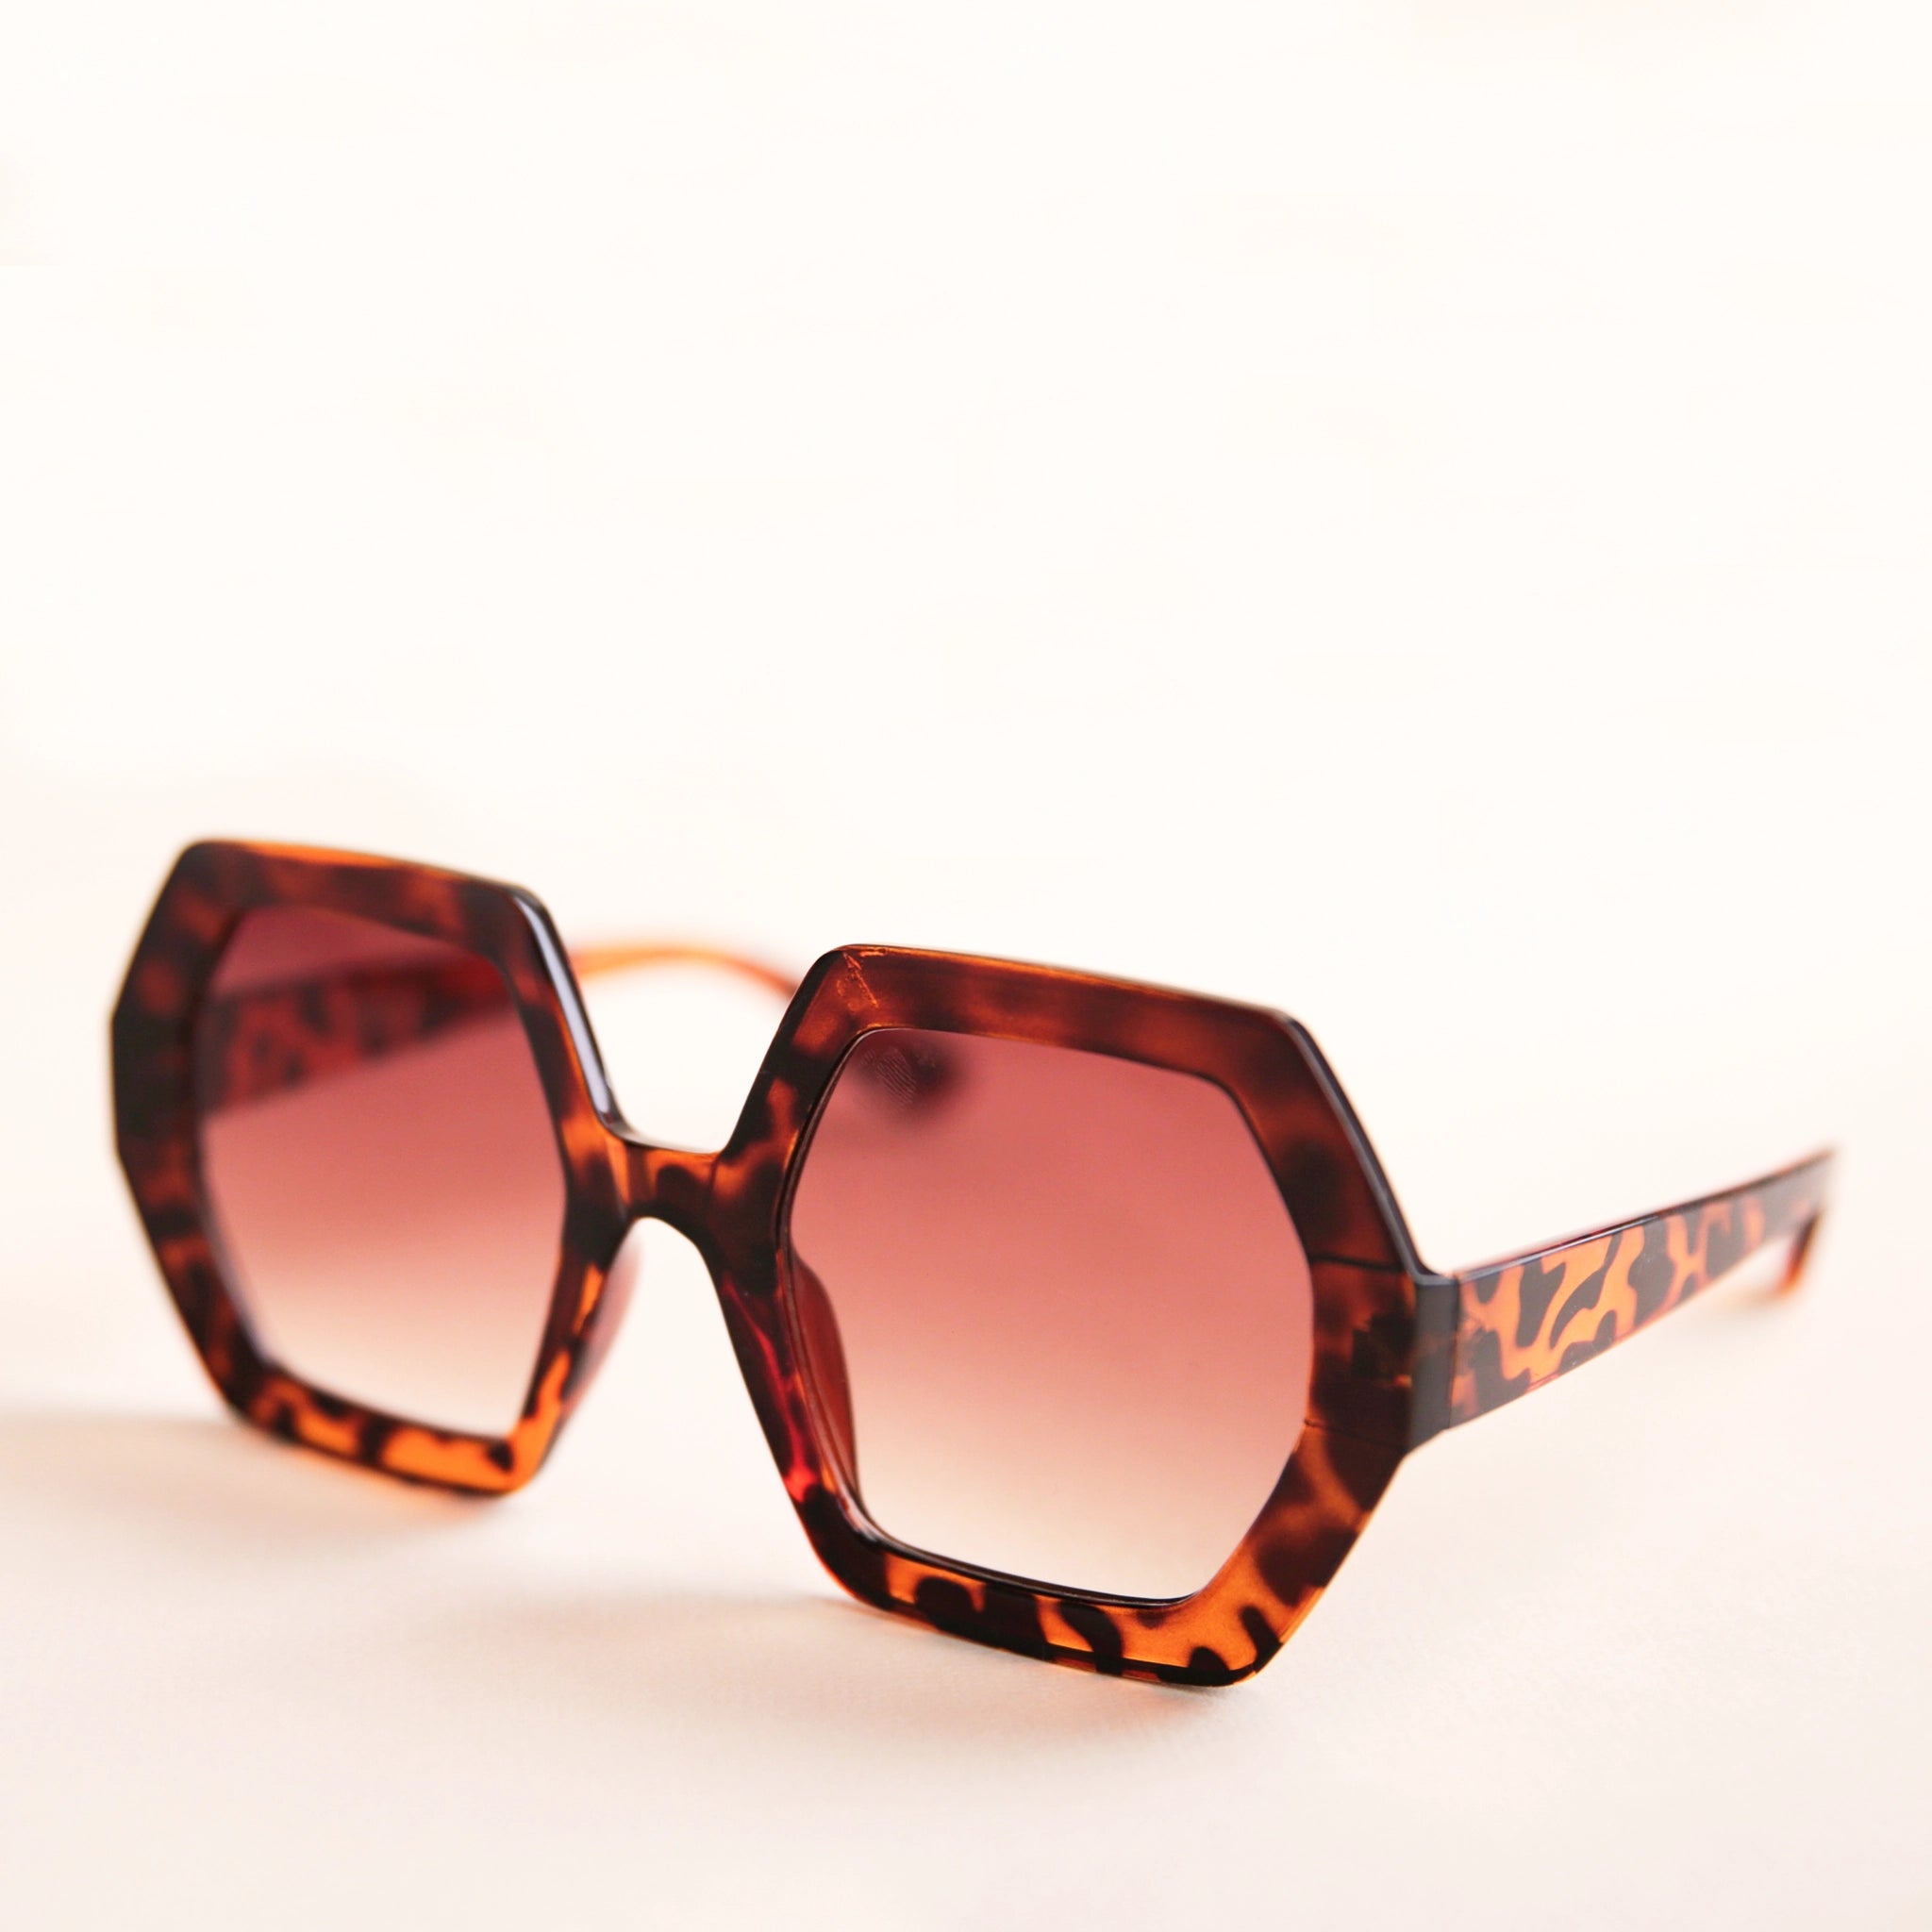 On a neutral background is a pair of hexagon shaped tortoise sunglasses with brown lenses.